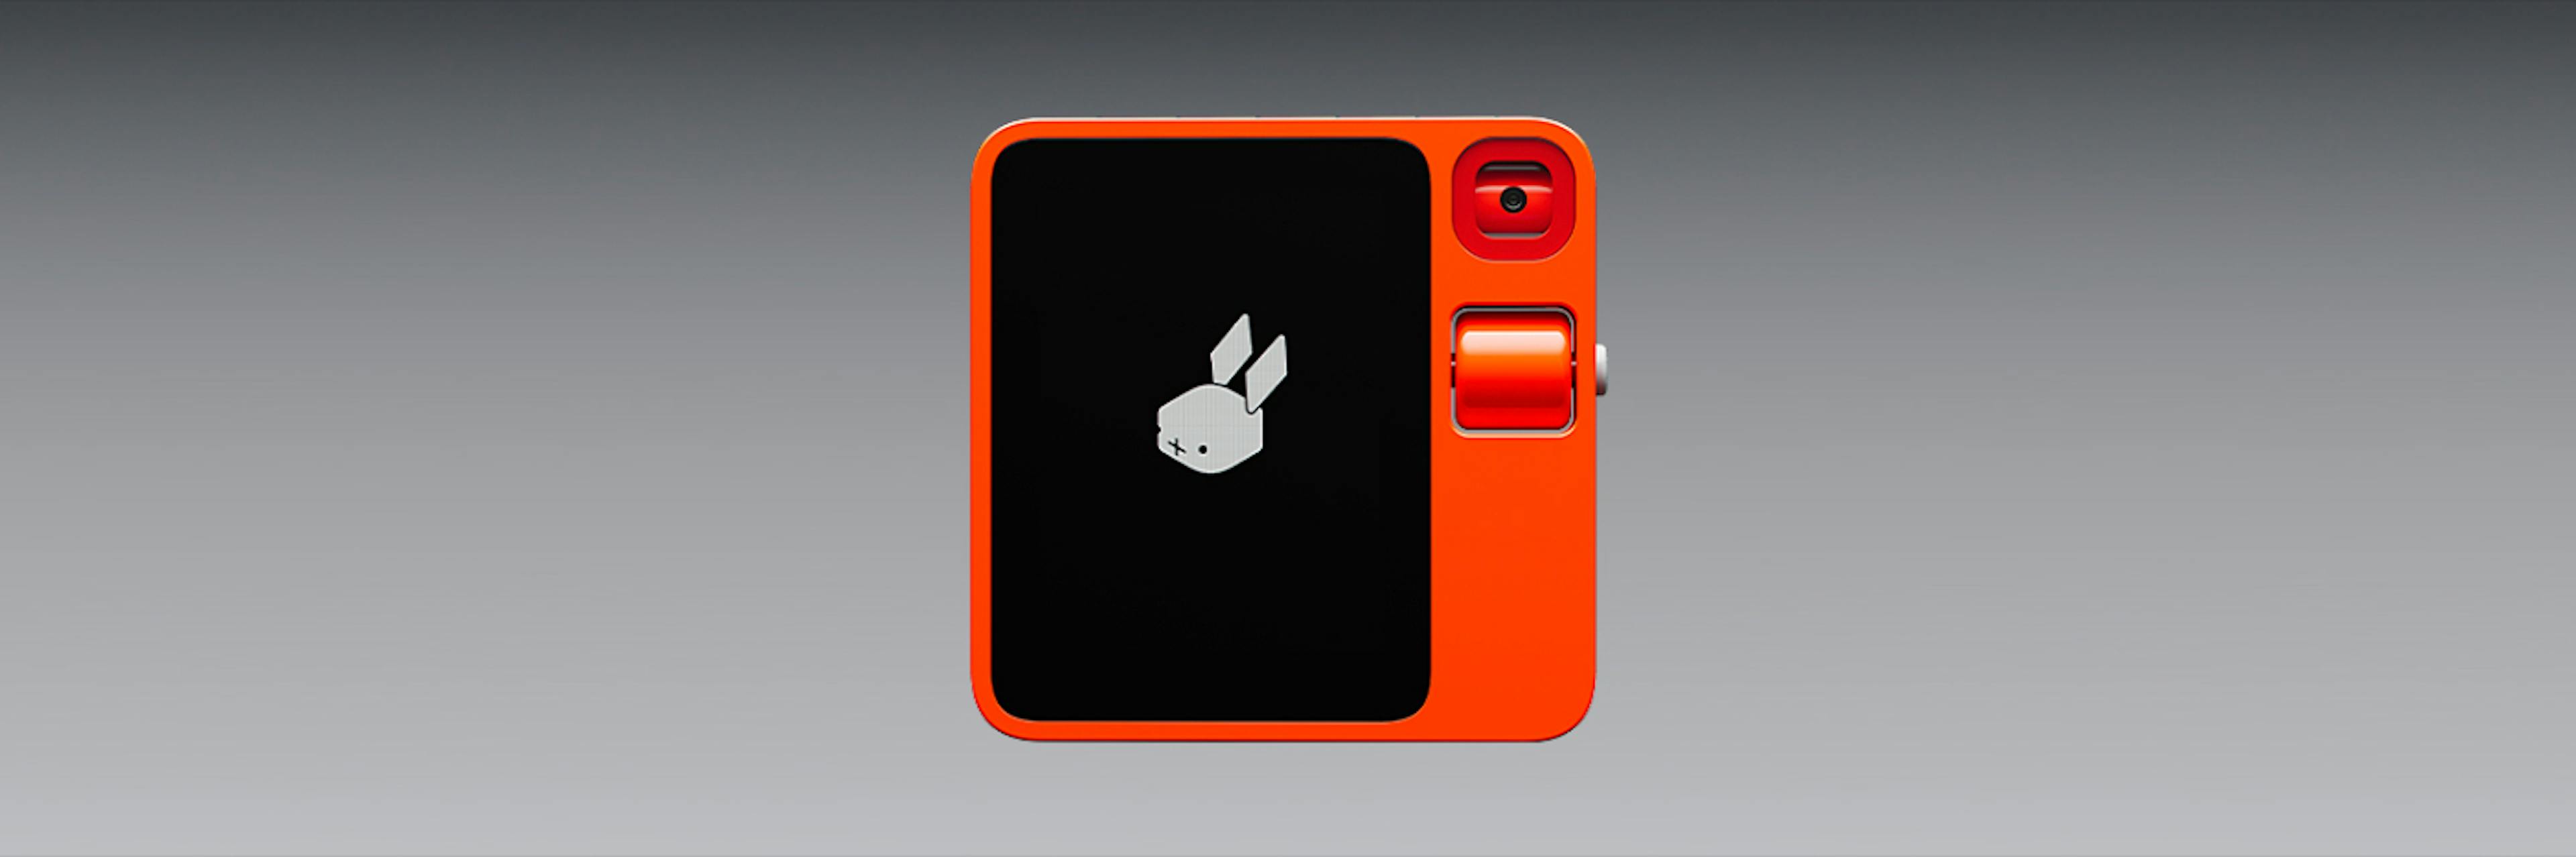 featured image - The Rabbit R1 & Humane AI Pin Will Probably Fail, but Apple and Google Can Pick Up the Slack